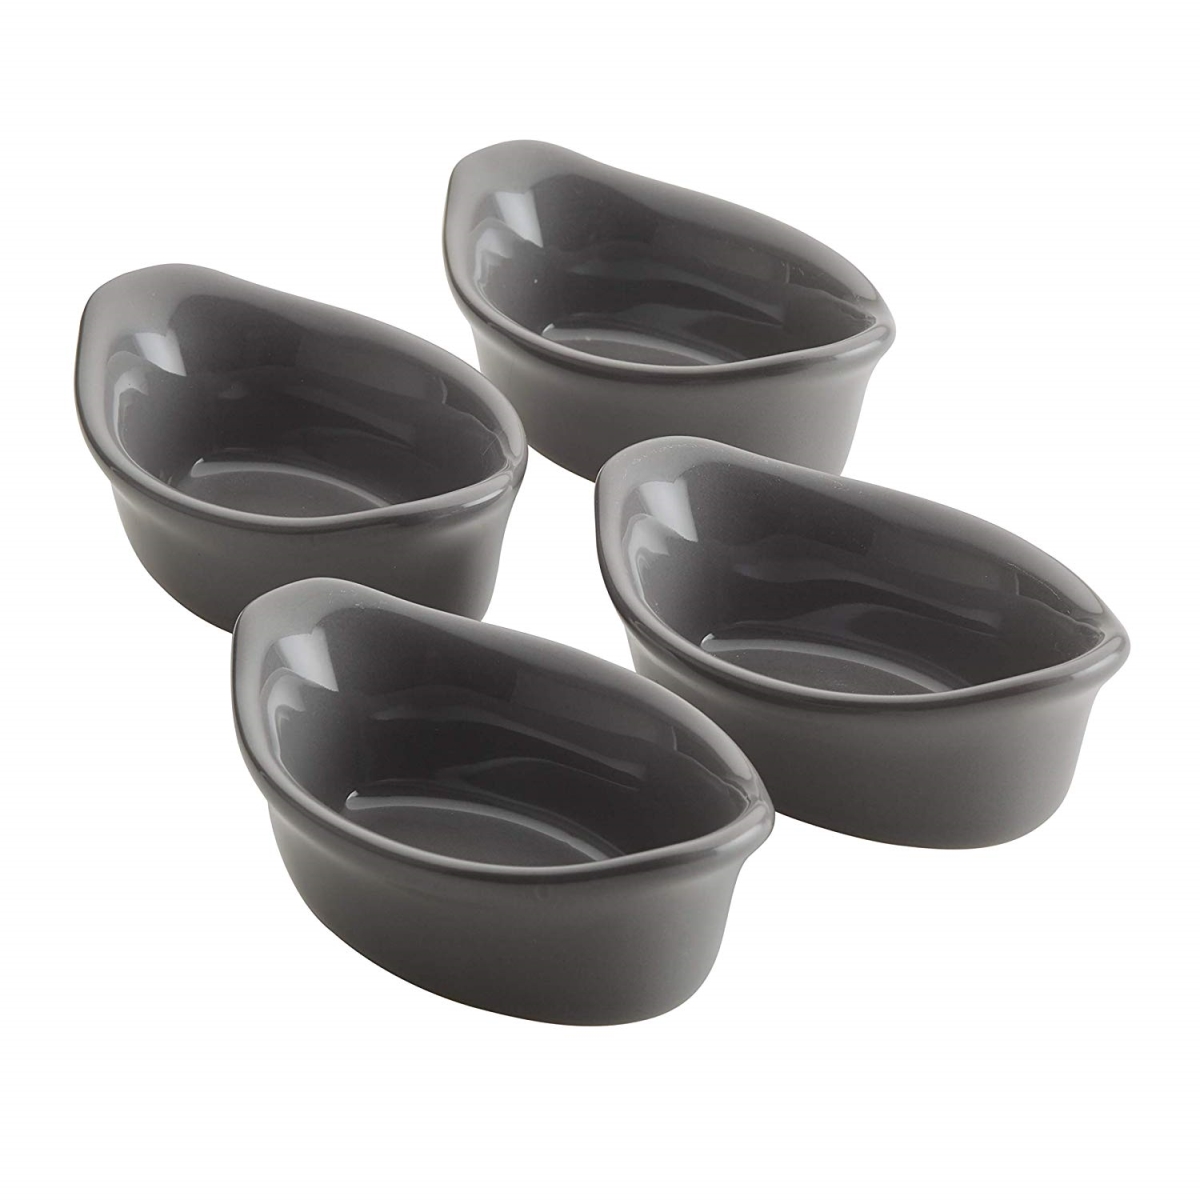 47864 Ceramics Oval Dipping Cups, Gray - 4 Piece